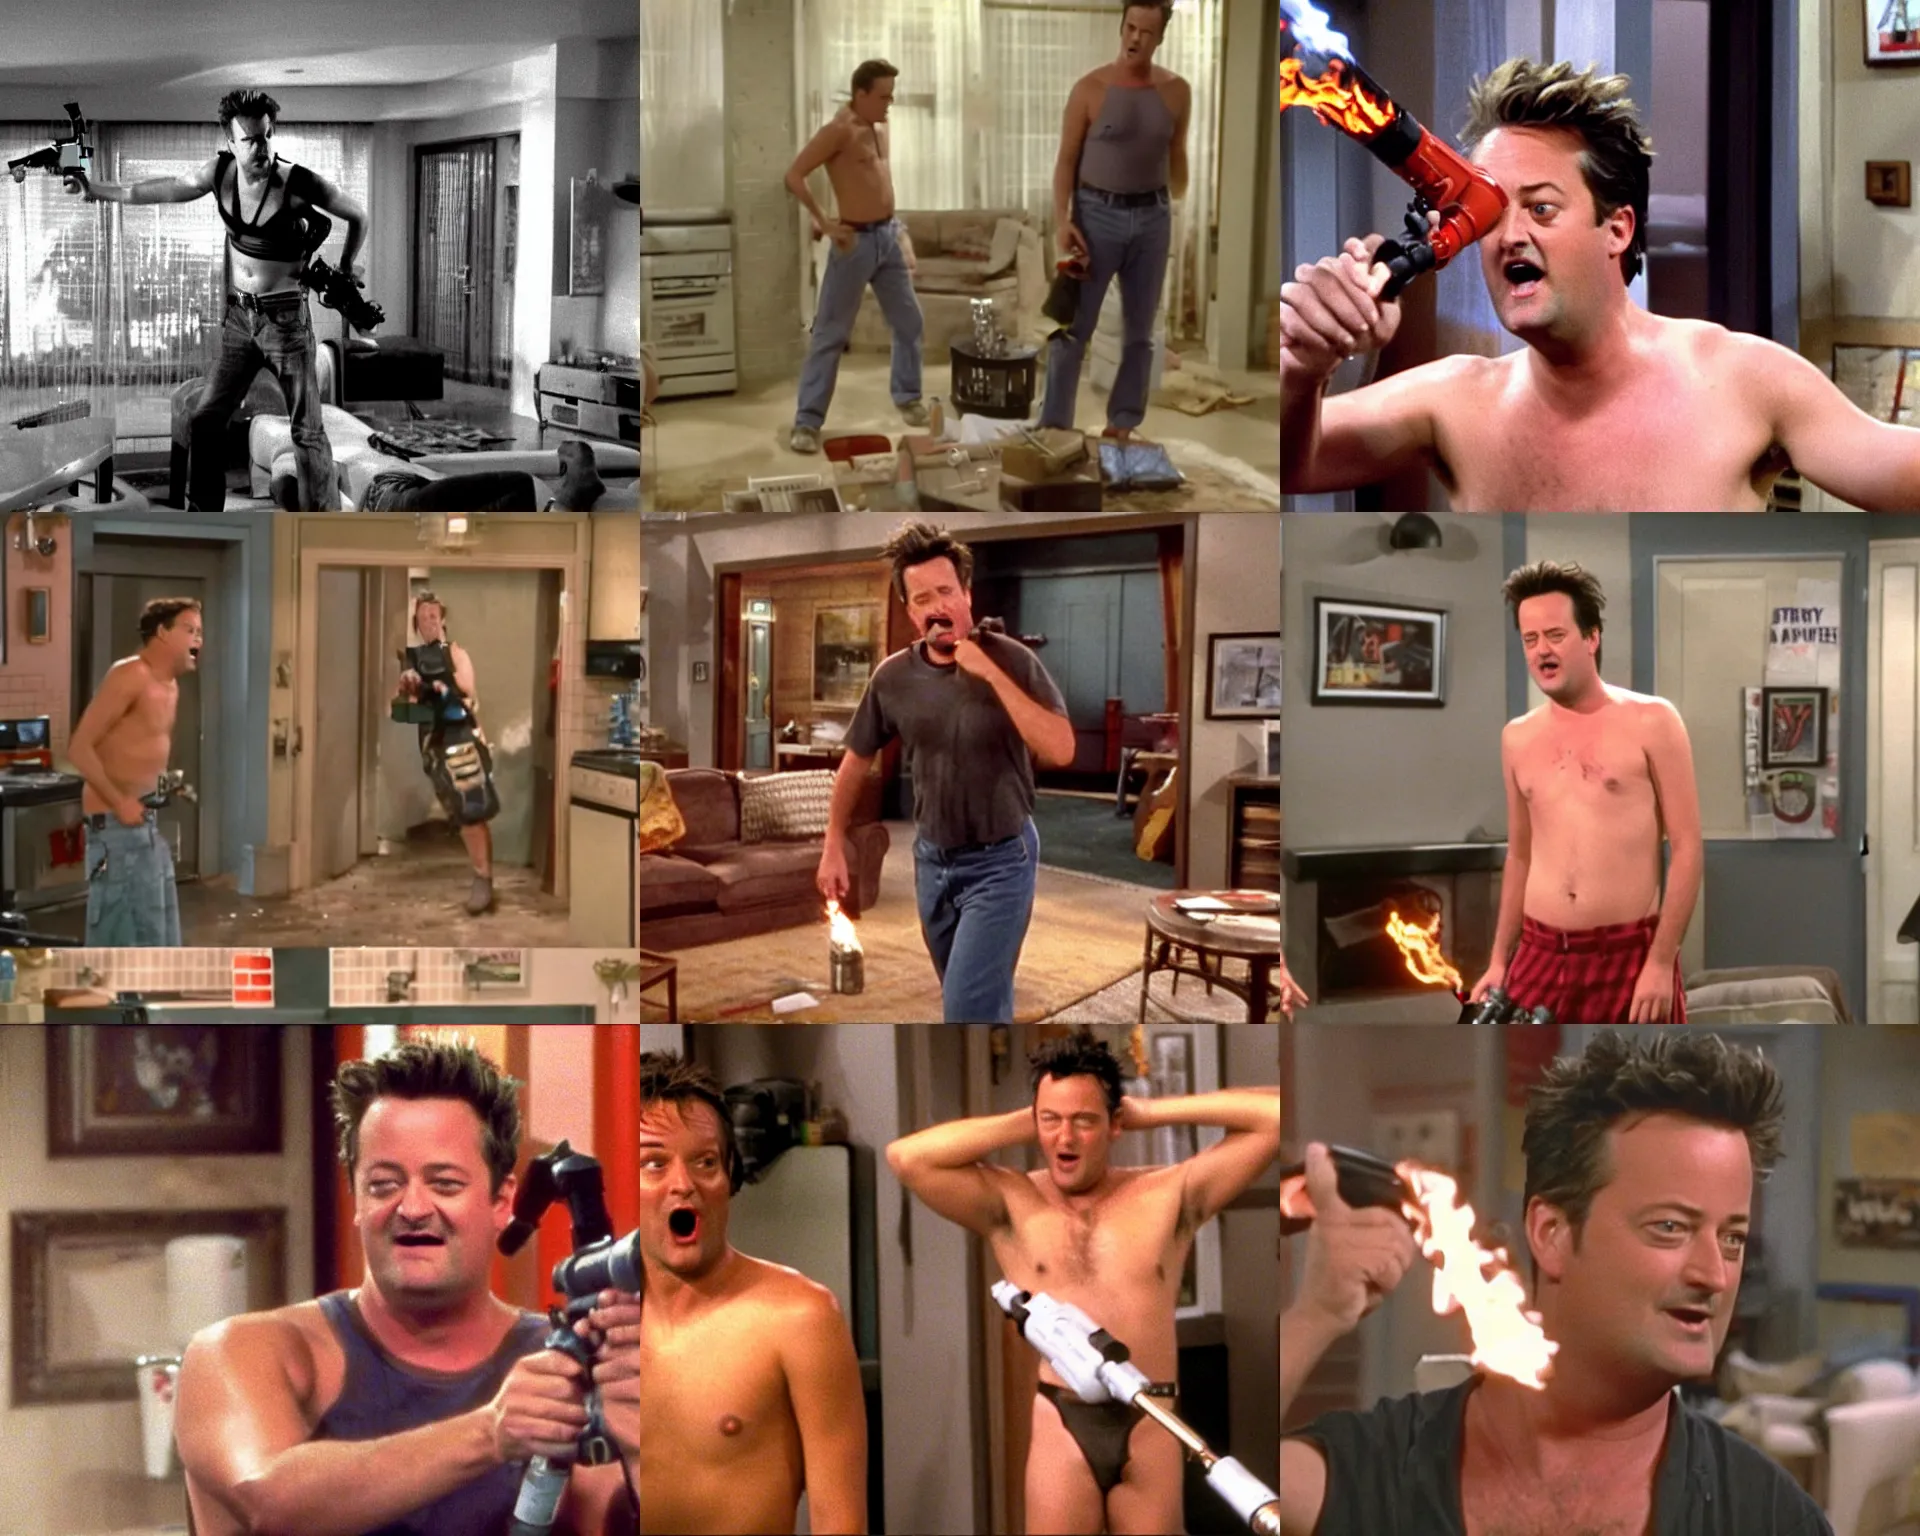 Prompt: matthew perry topless in his apartment using a flamethrower and screaming, m 2 flamethrower,'friends'9 0 s tv show screenshot, wideshot,